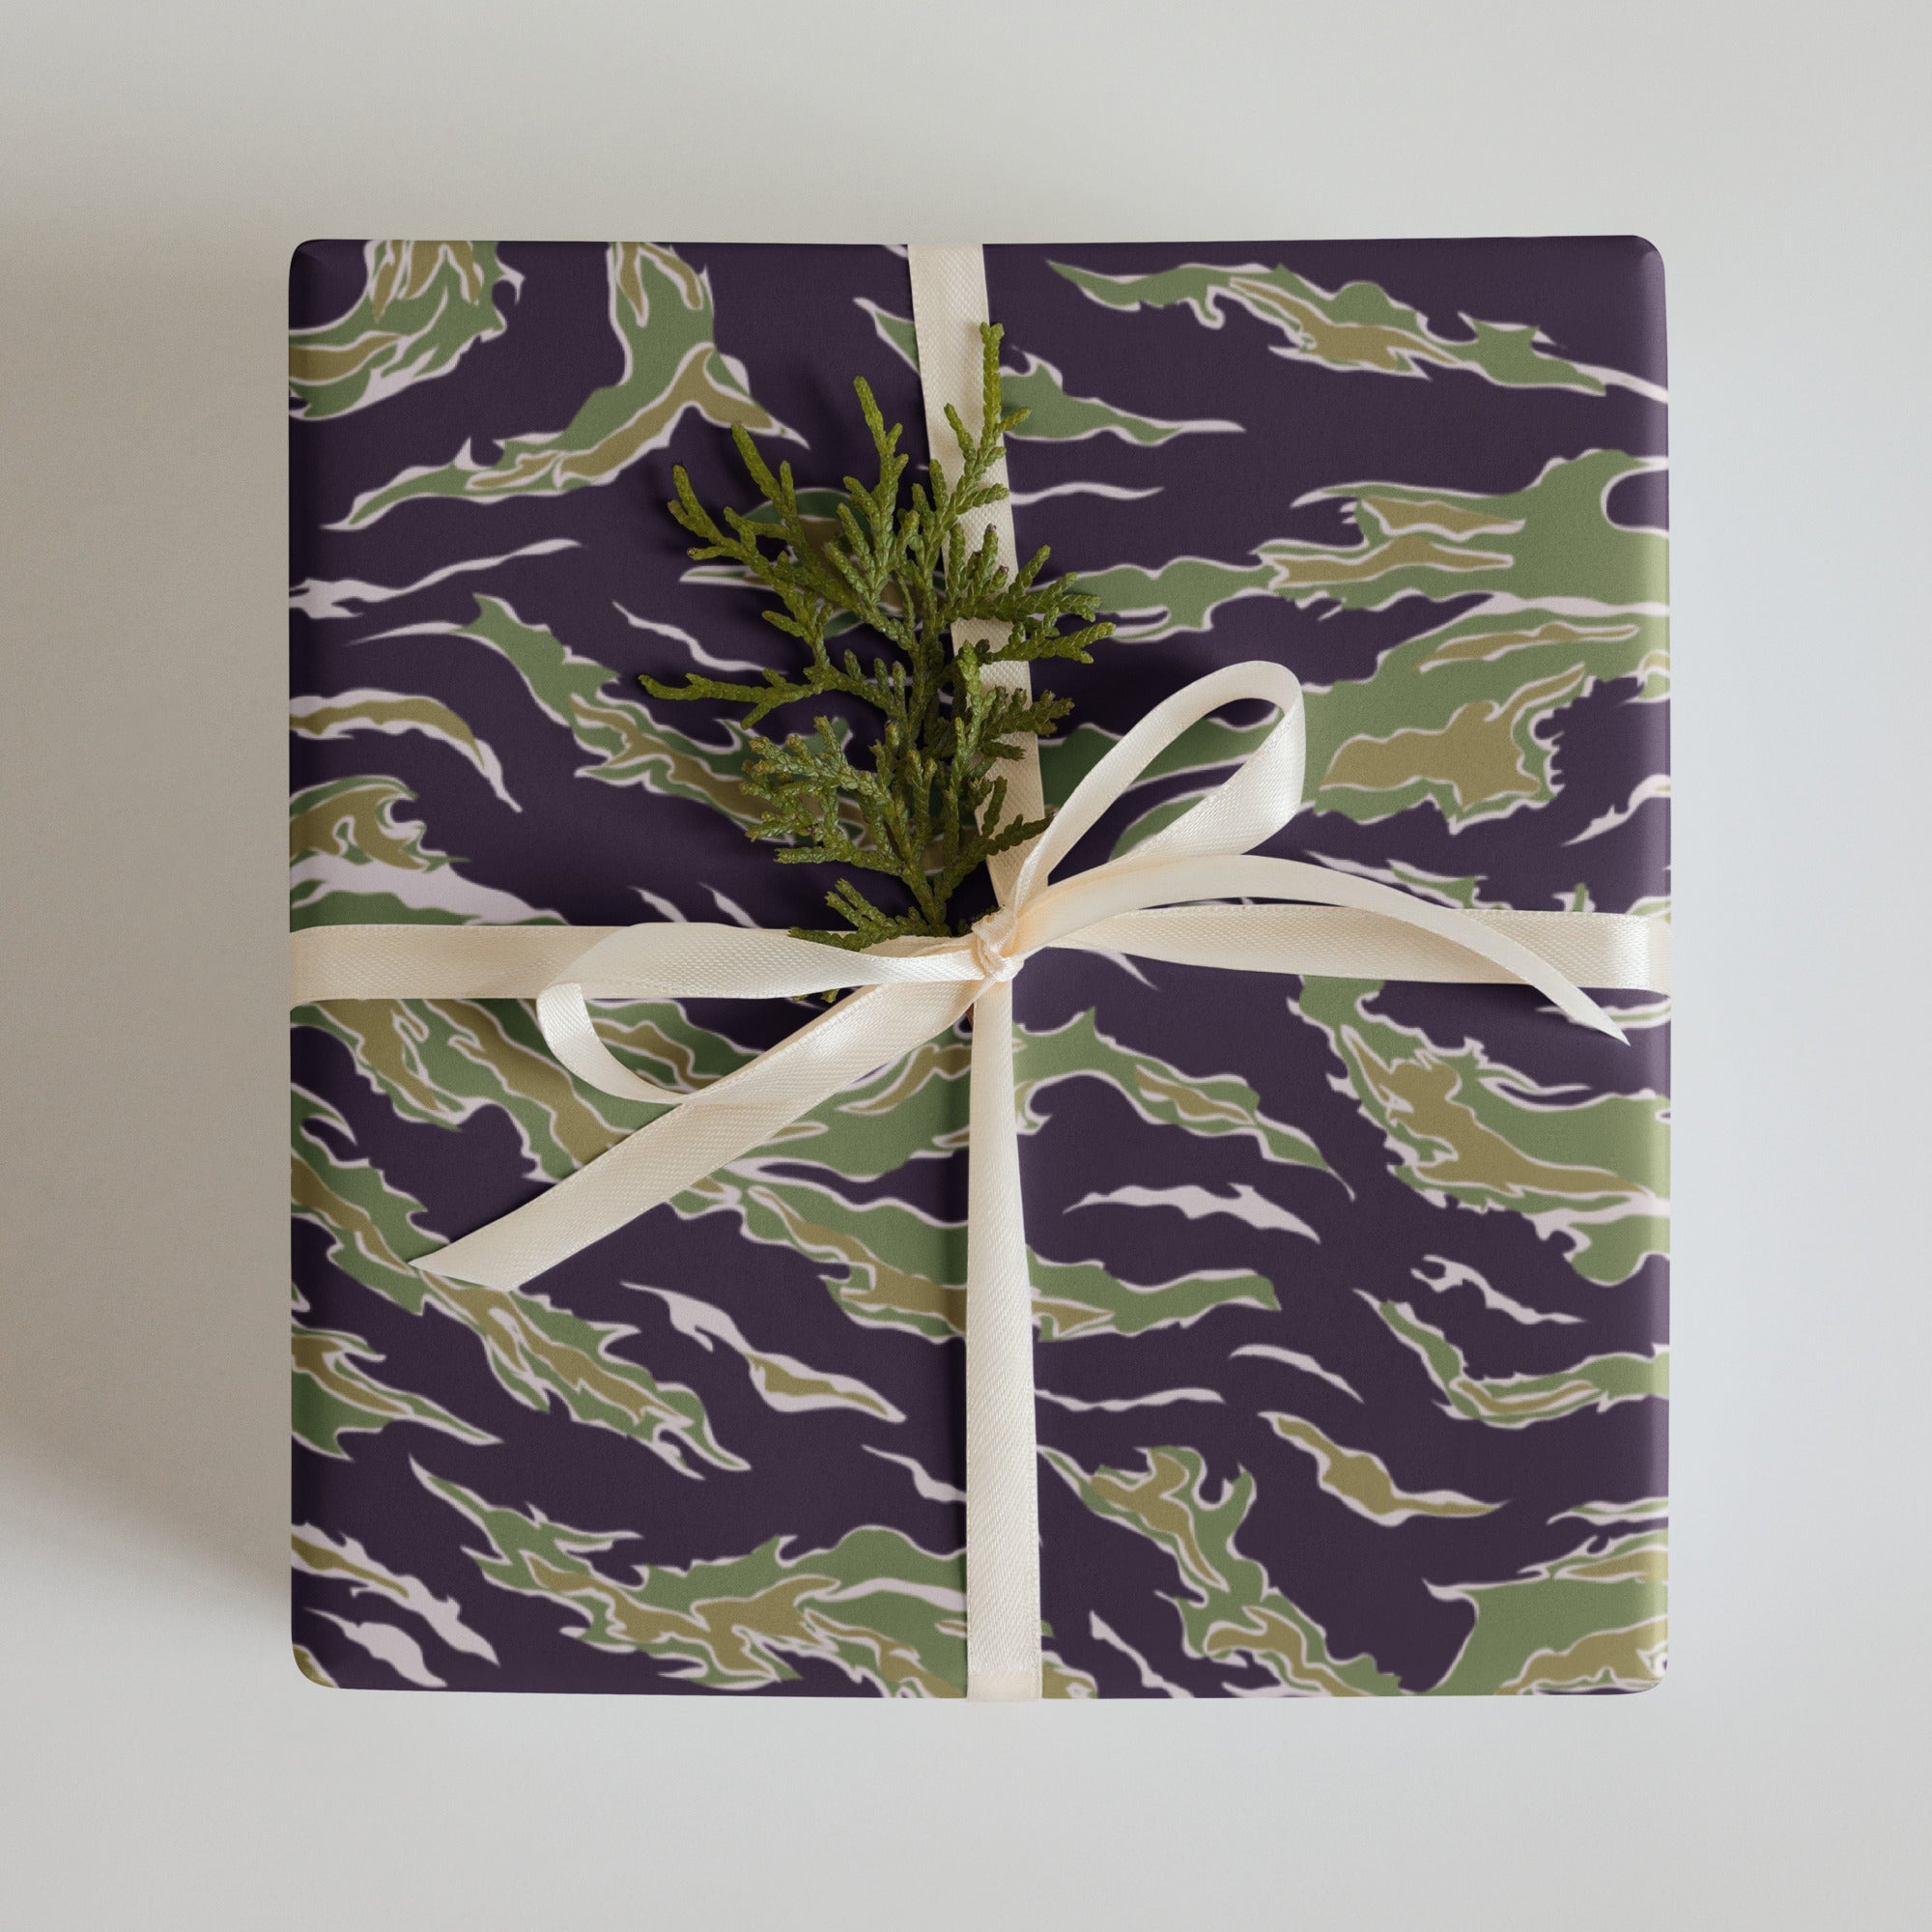 Tiger Strip Camo Wrapping Paper